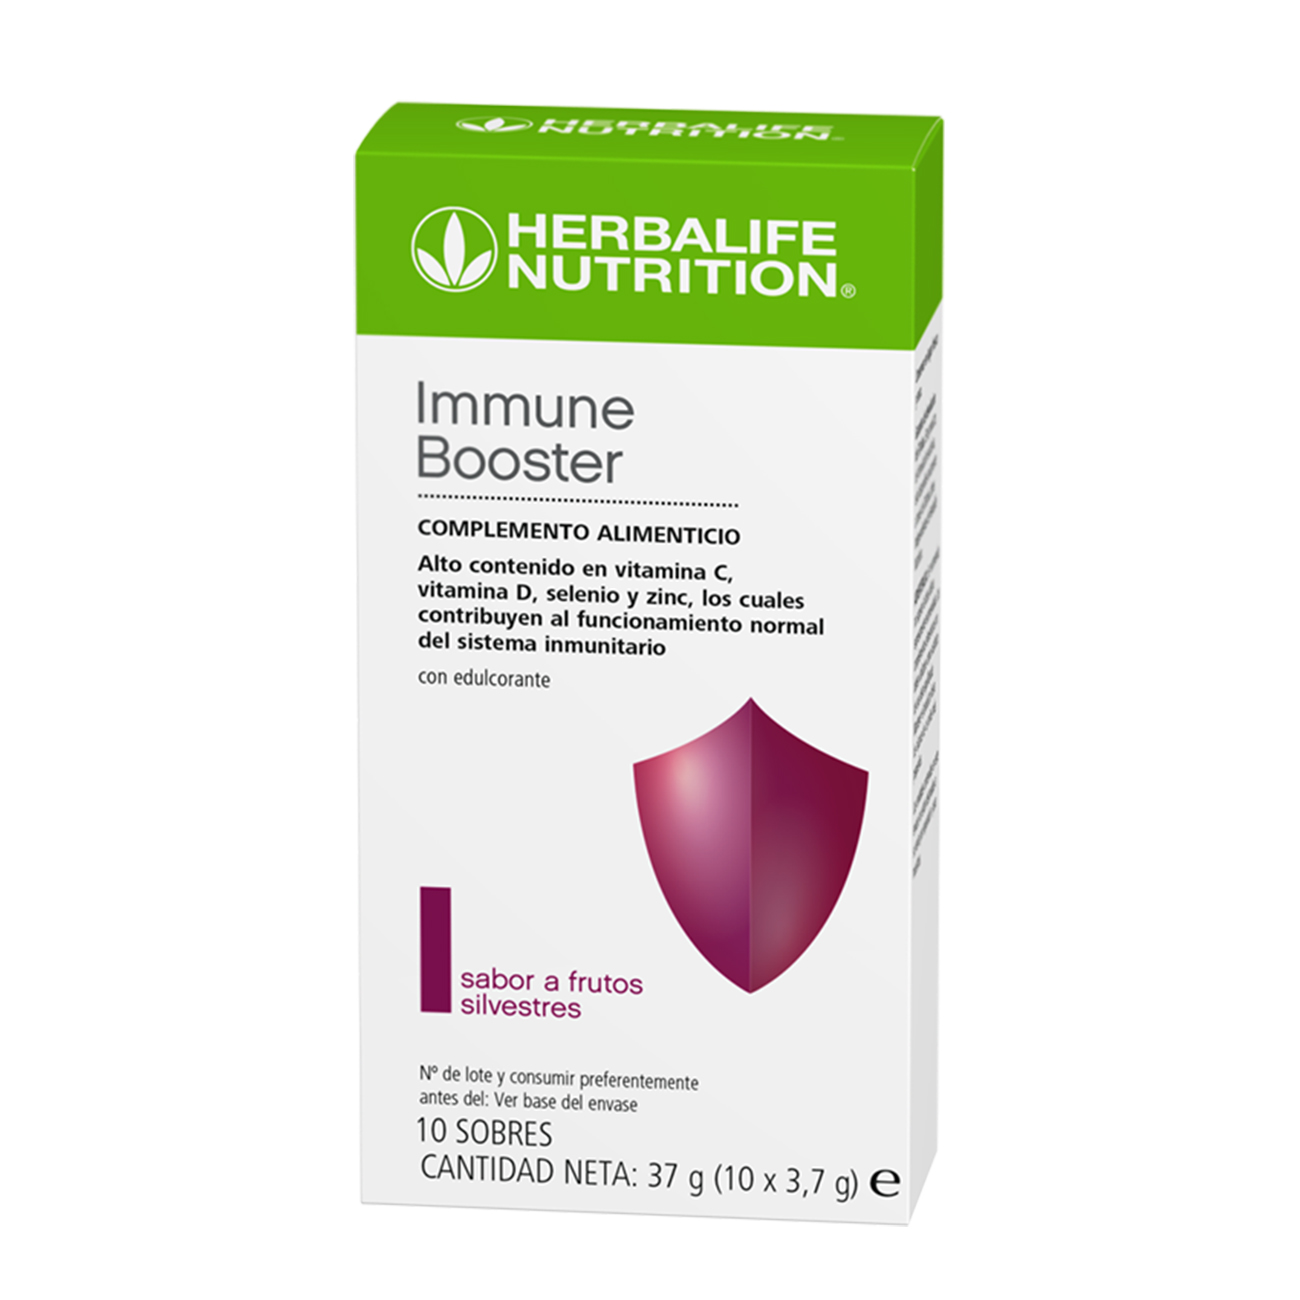 Immune Booster product shot